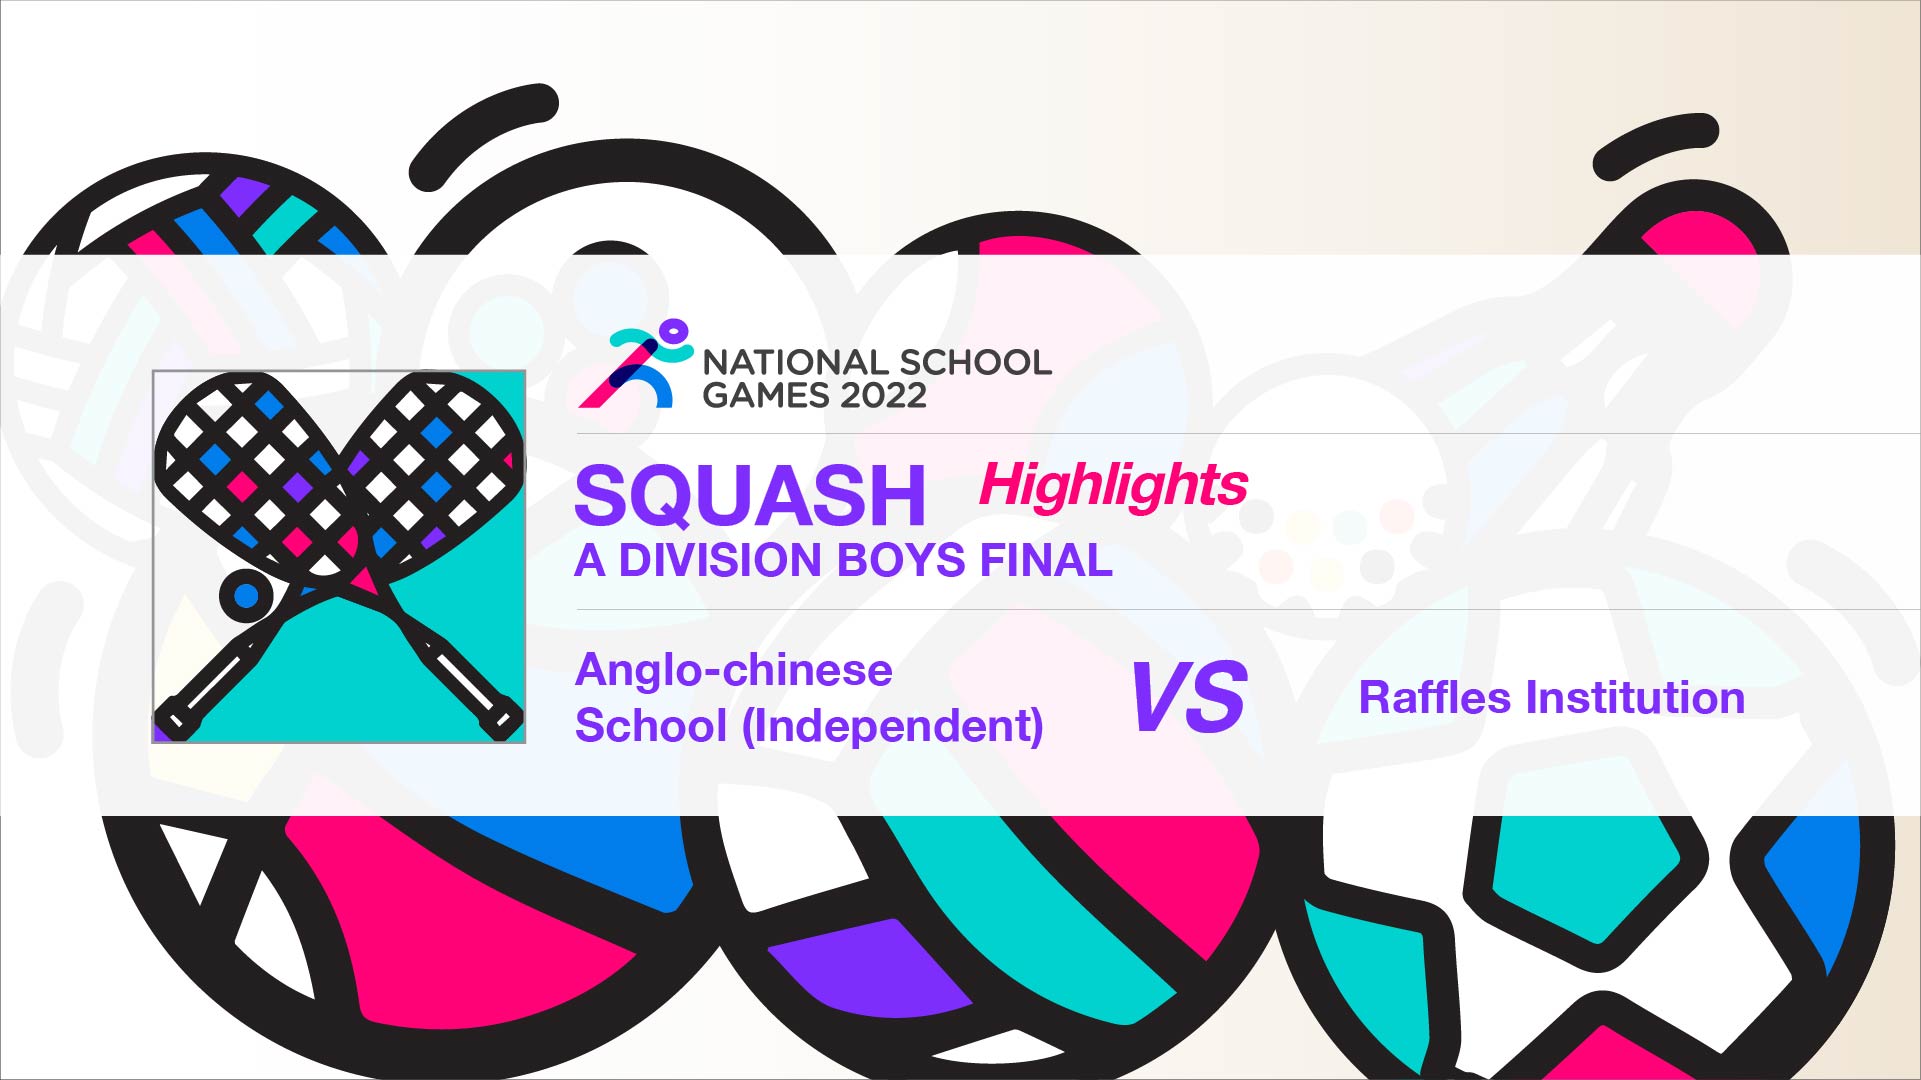 SSSC Squash A Division Boys Final | Anglo-Chinese School (Independent) vs Raffles Institution - Highlights